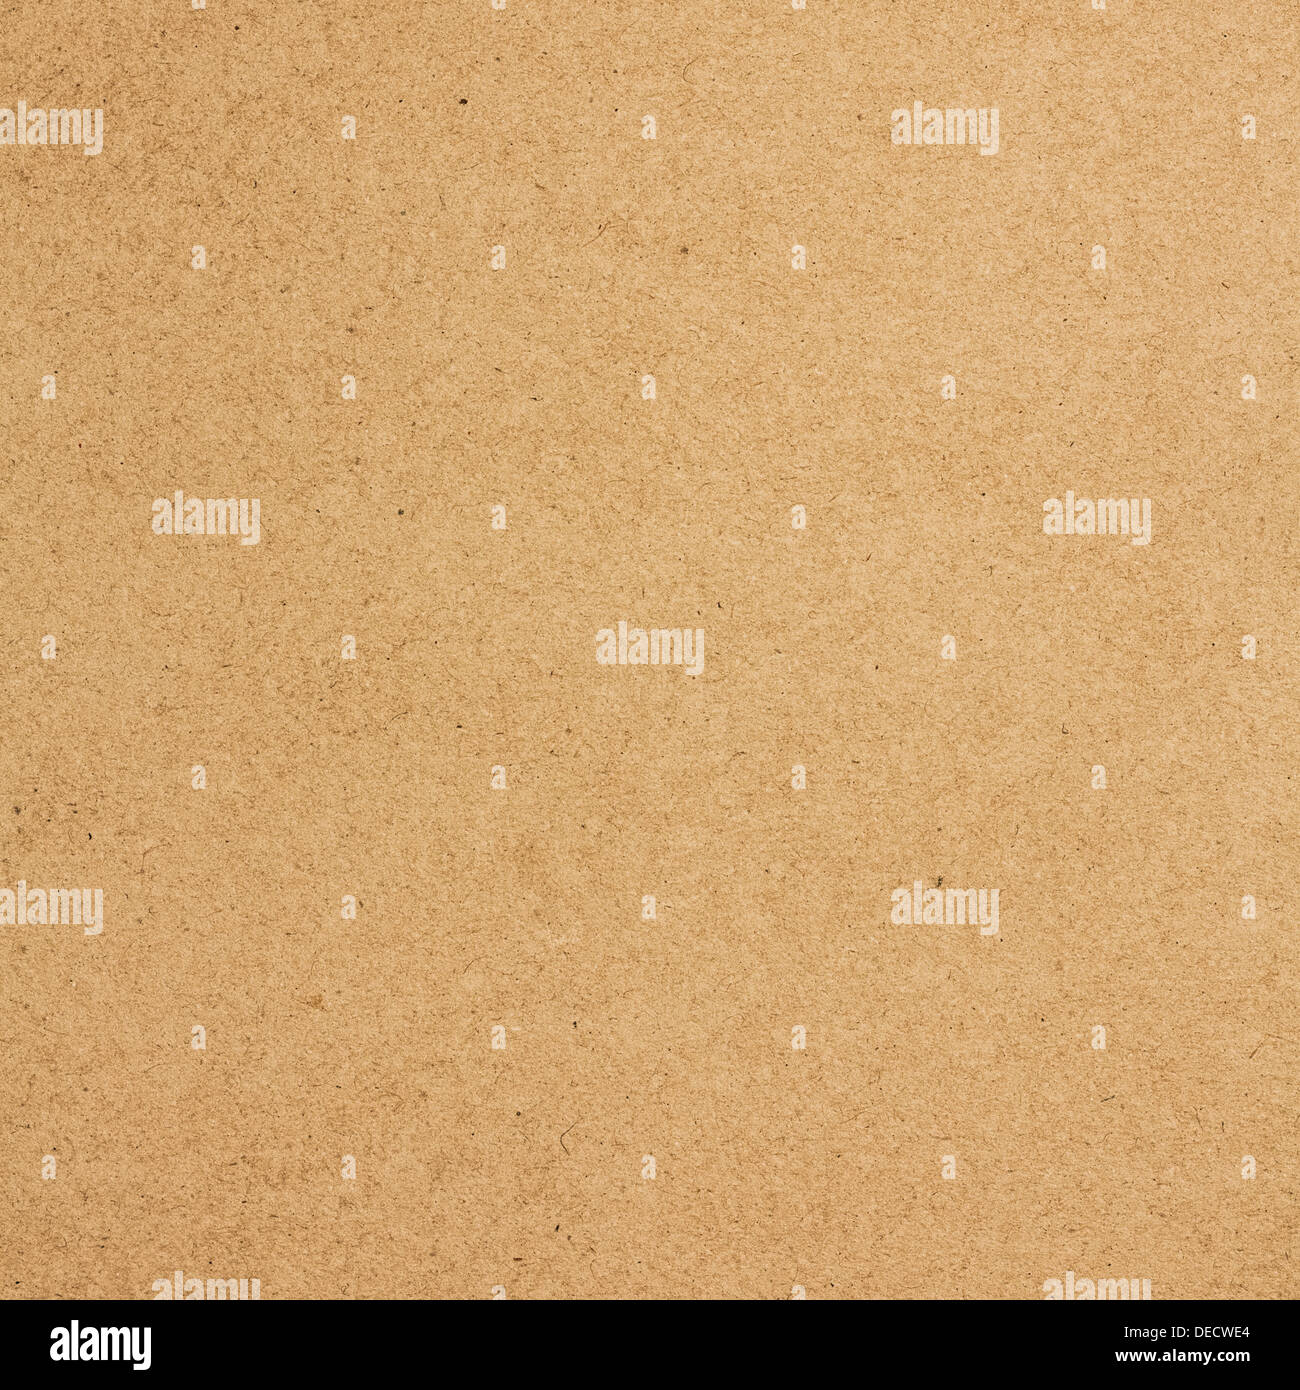 Old Brown Paper Texture Background For Artwork Stock Photo